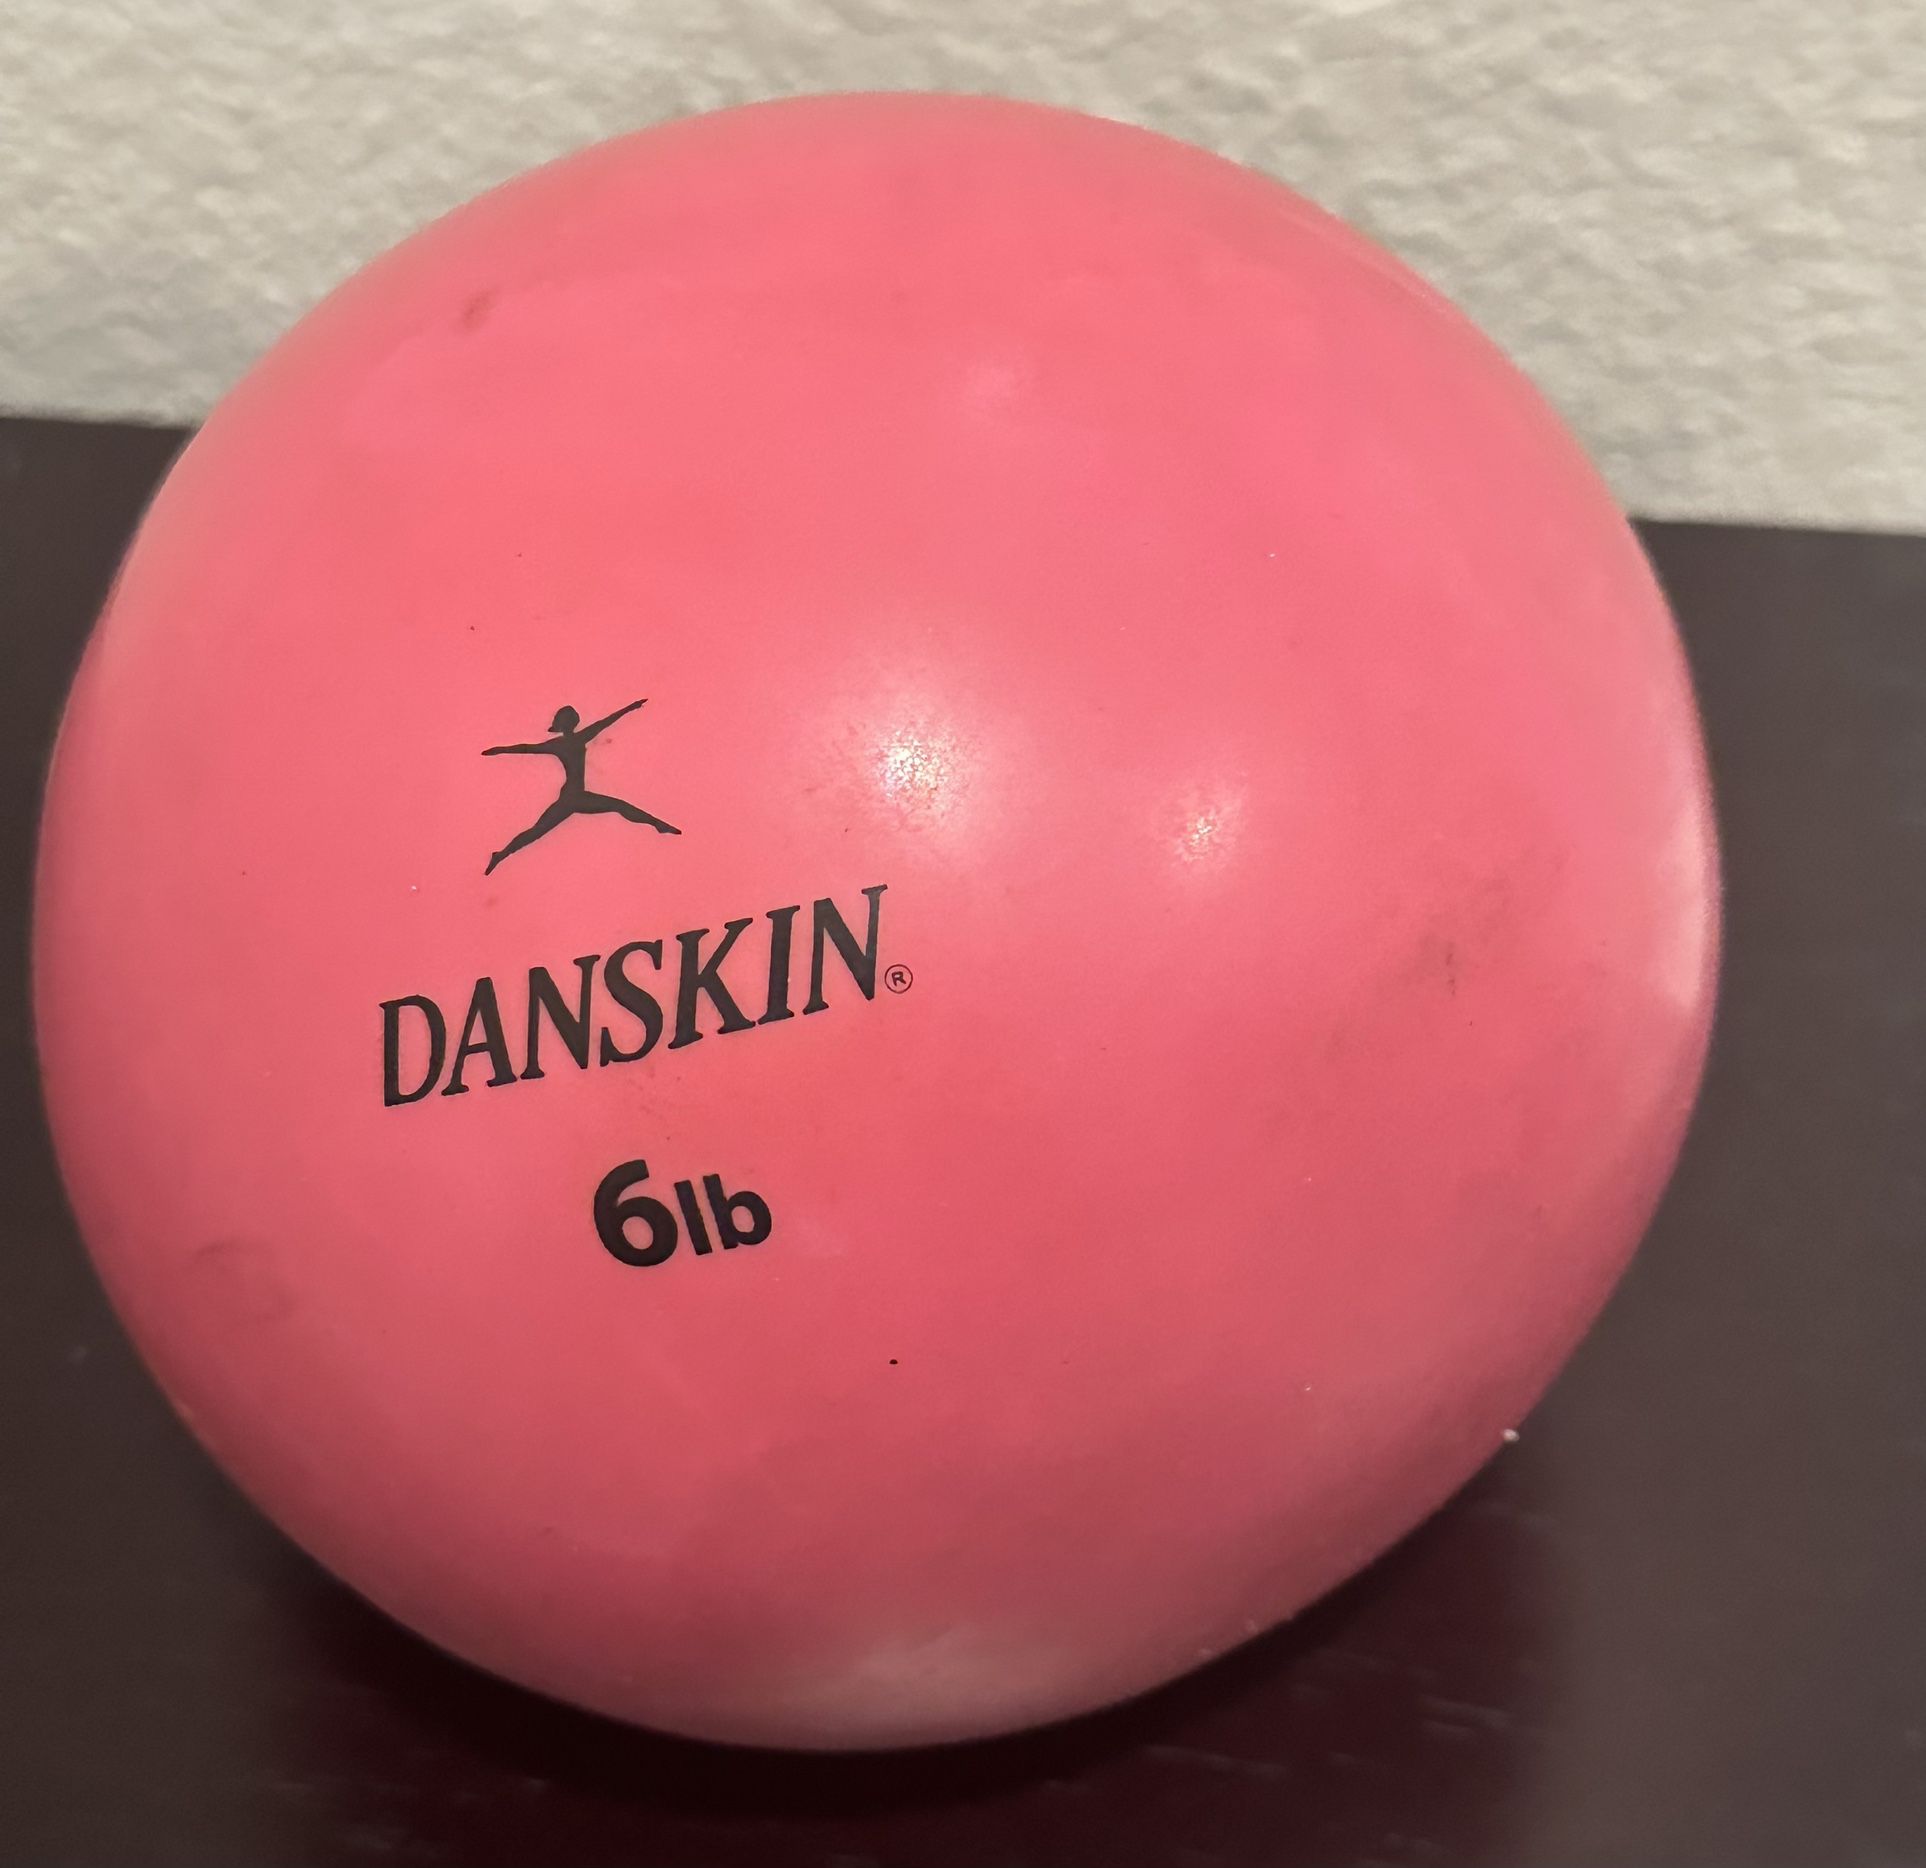 Danskin 6 lb. Medicine Toning Ball soft weighted exercise red